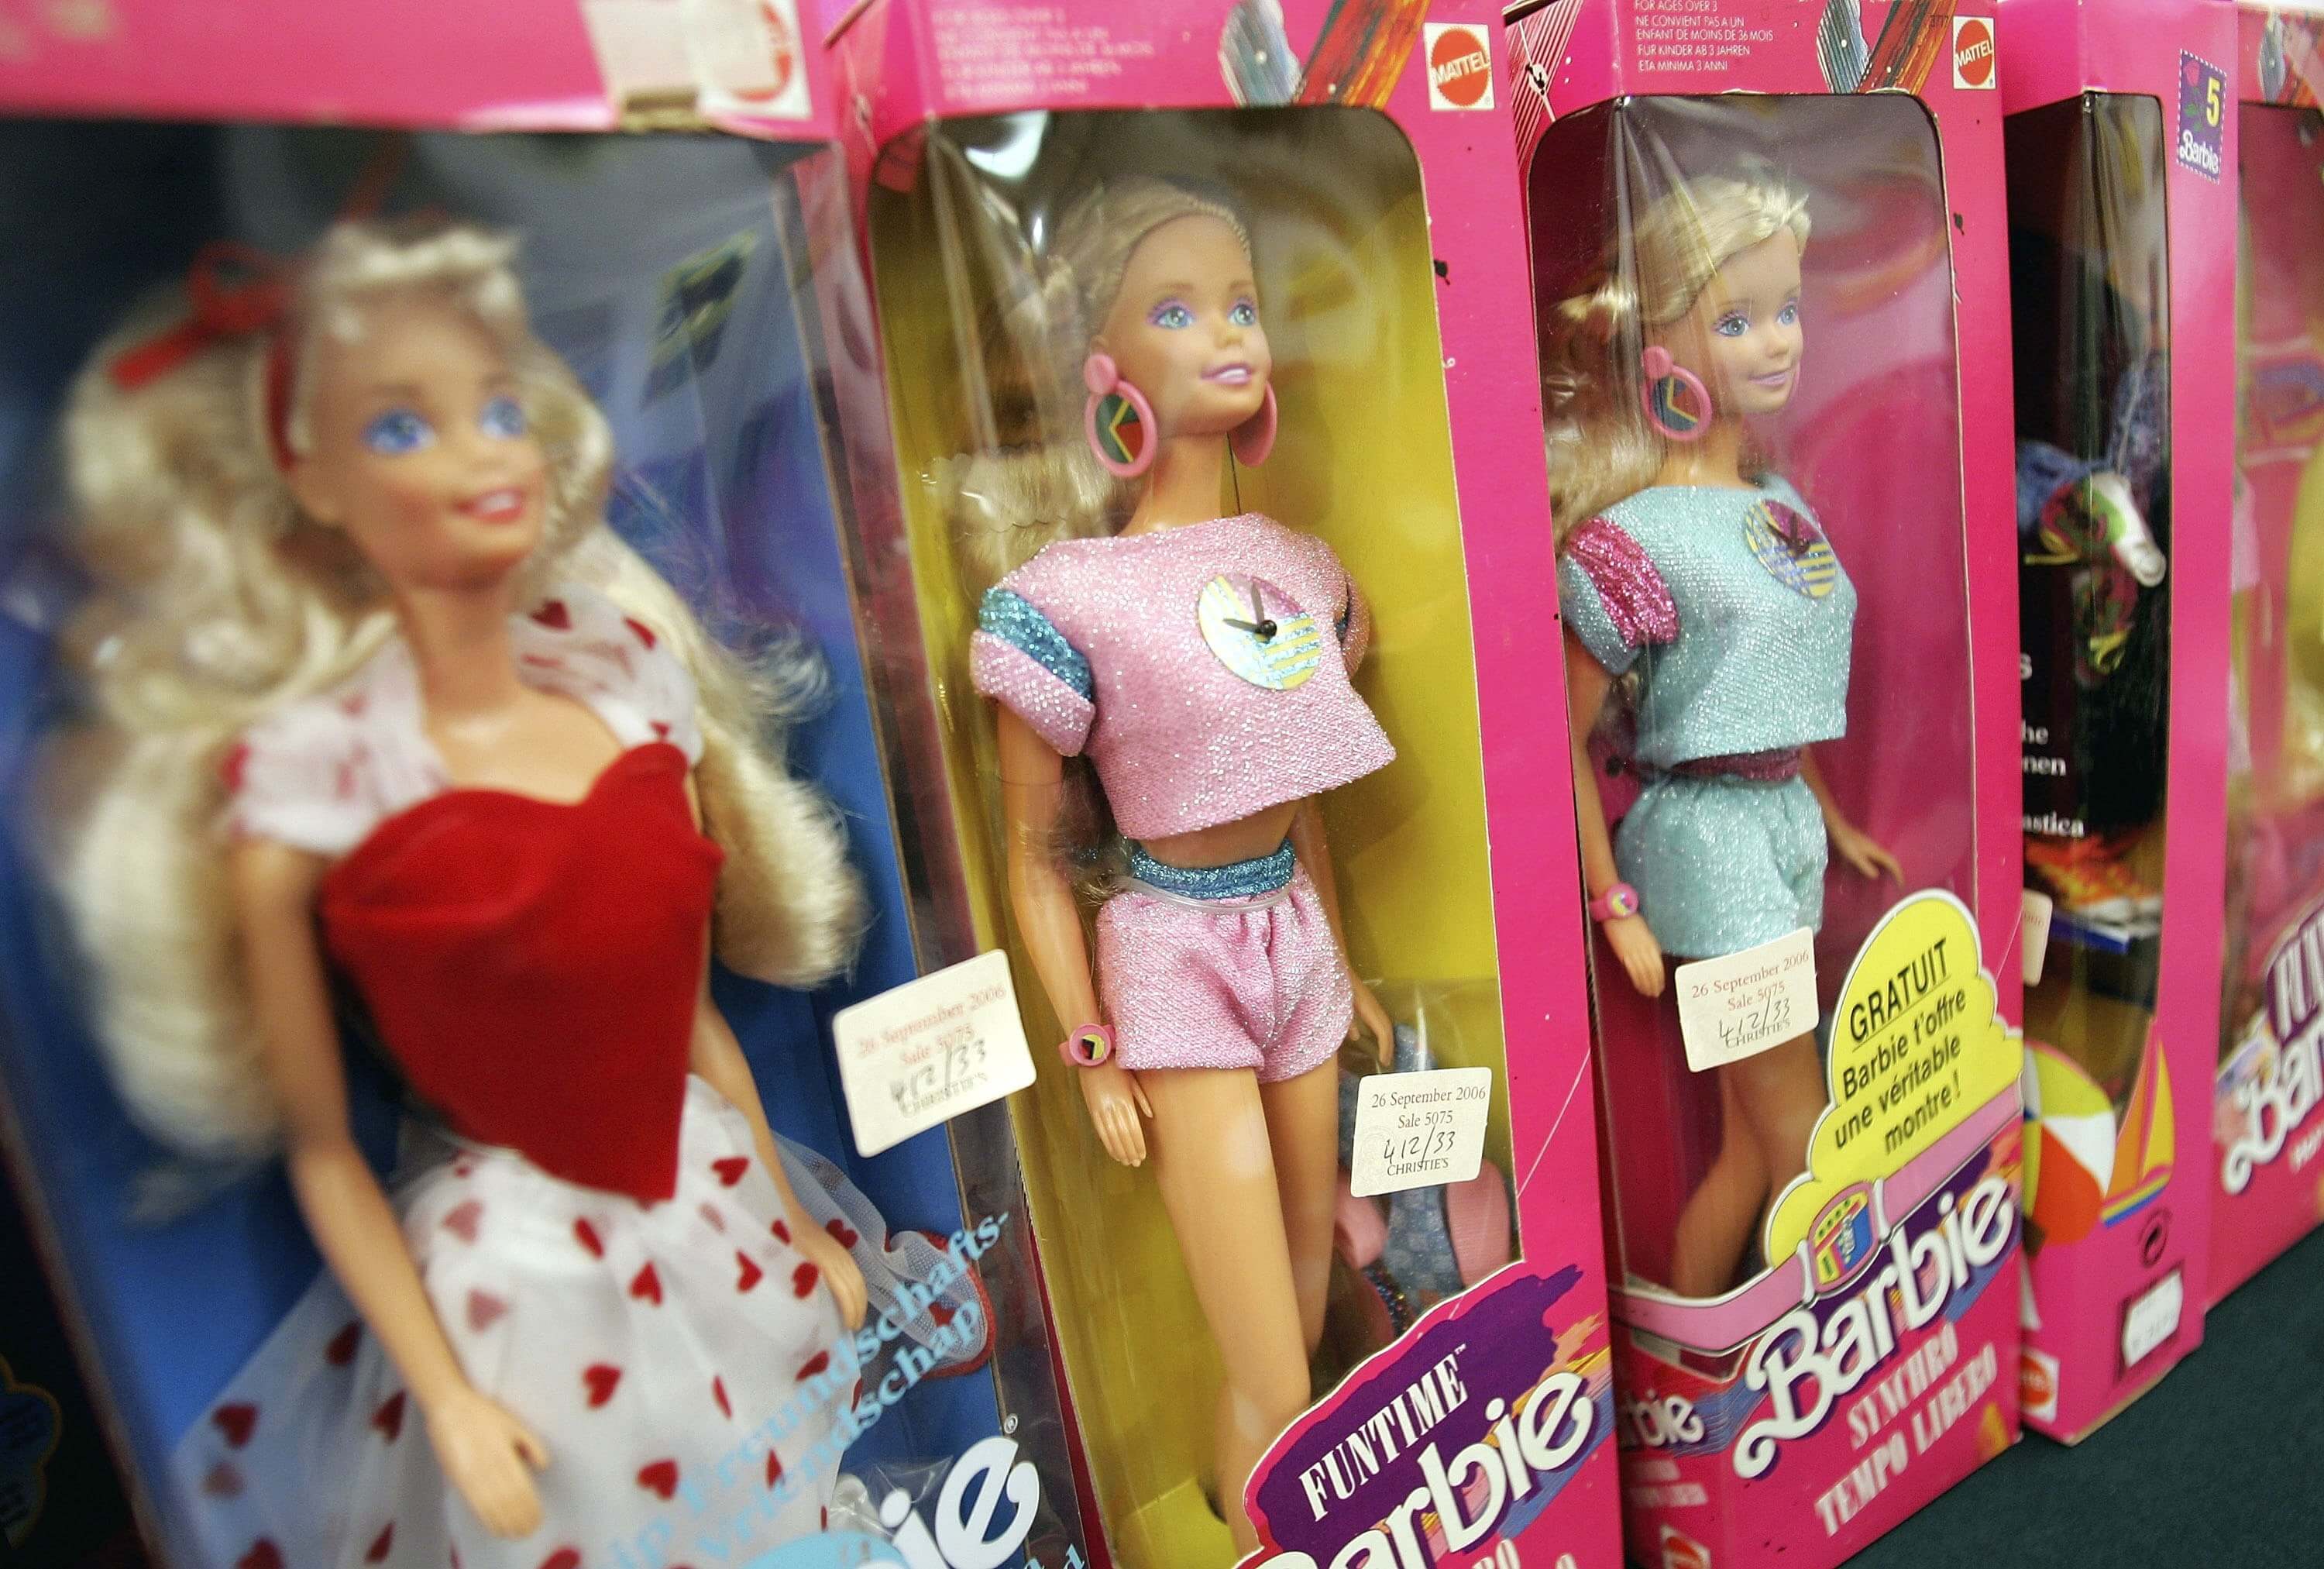 Barbies, the subject of Aqua's "Barbie Girl," in pink packaging